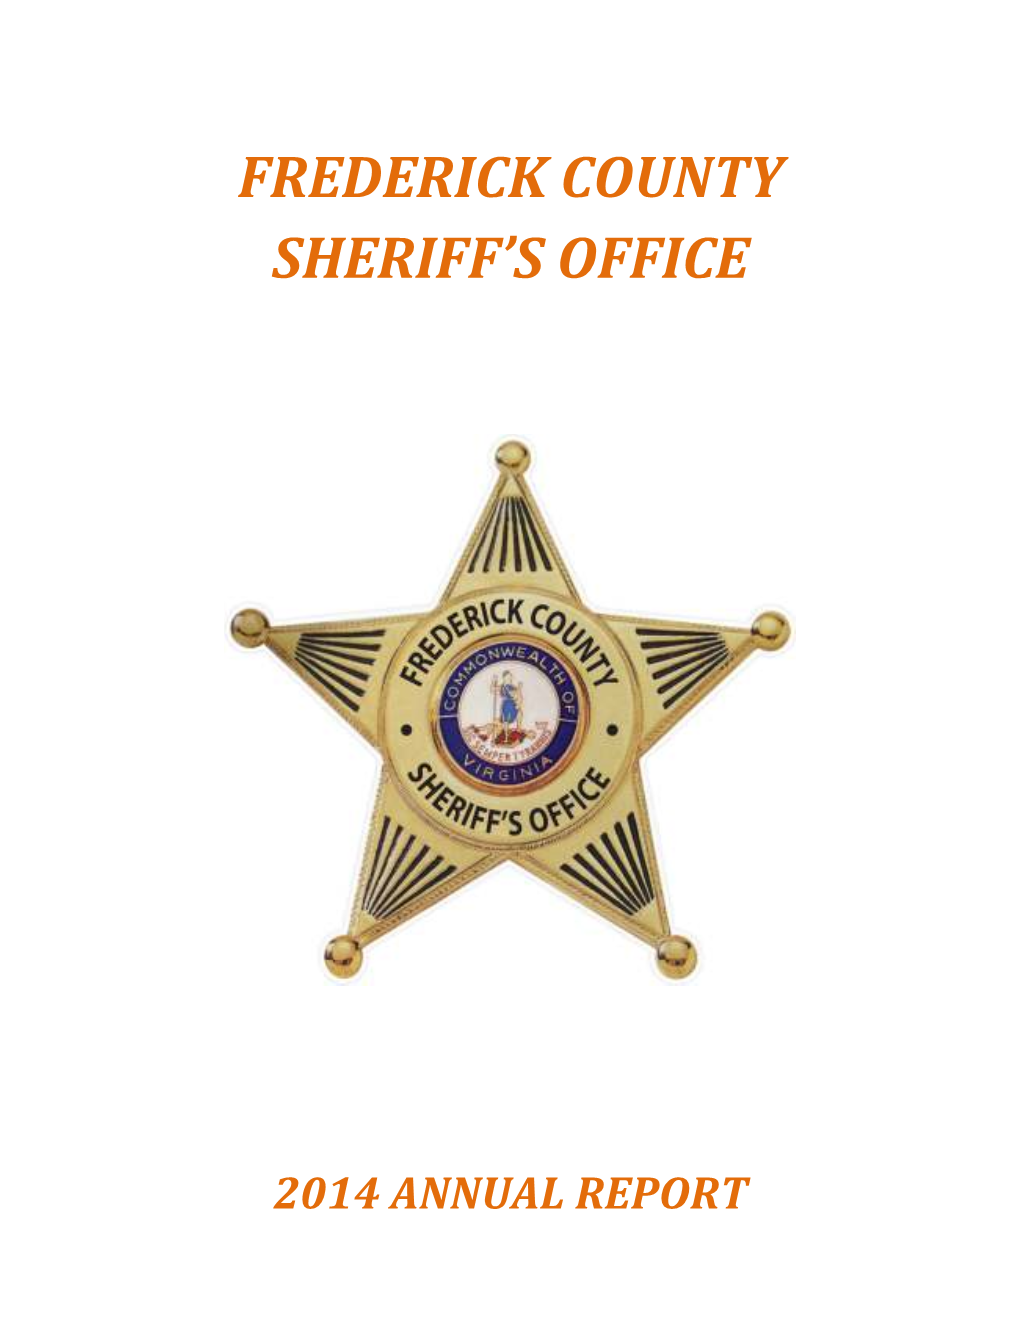 Frederick County Sheriff's Office to Provide Fair, Unbiased Law Enforcement Services to the Public, While Respecting the Individual’S Constitutional Rights